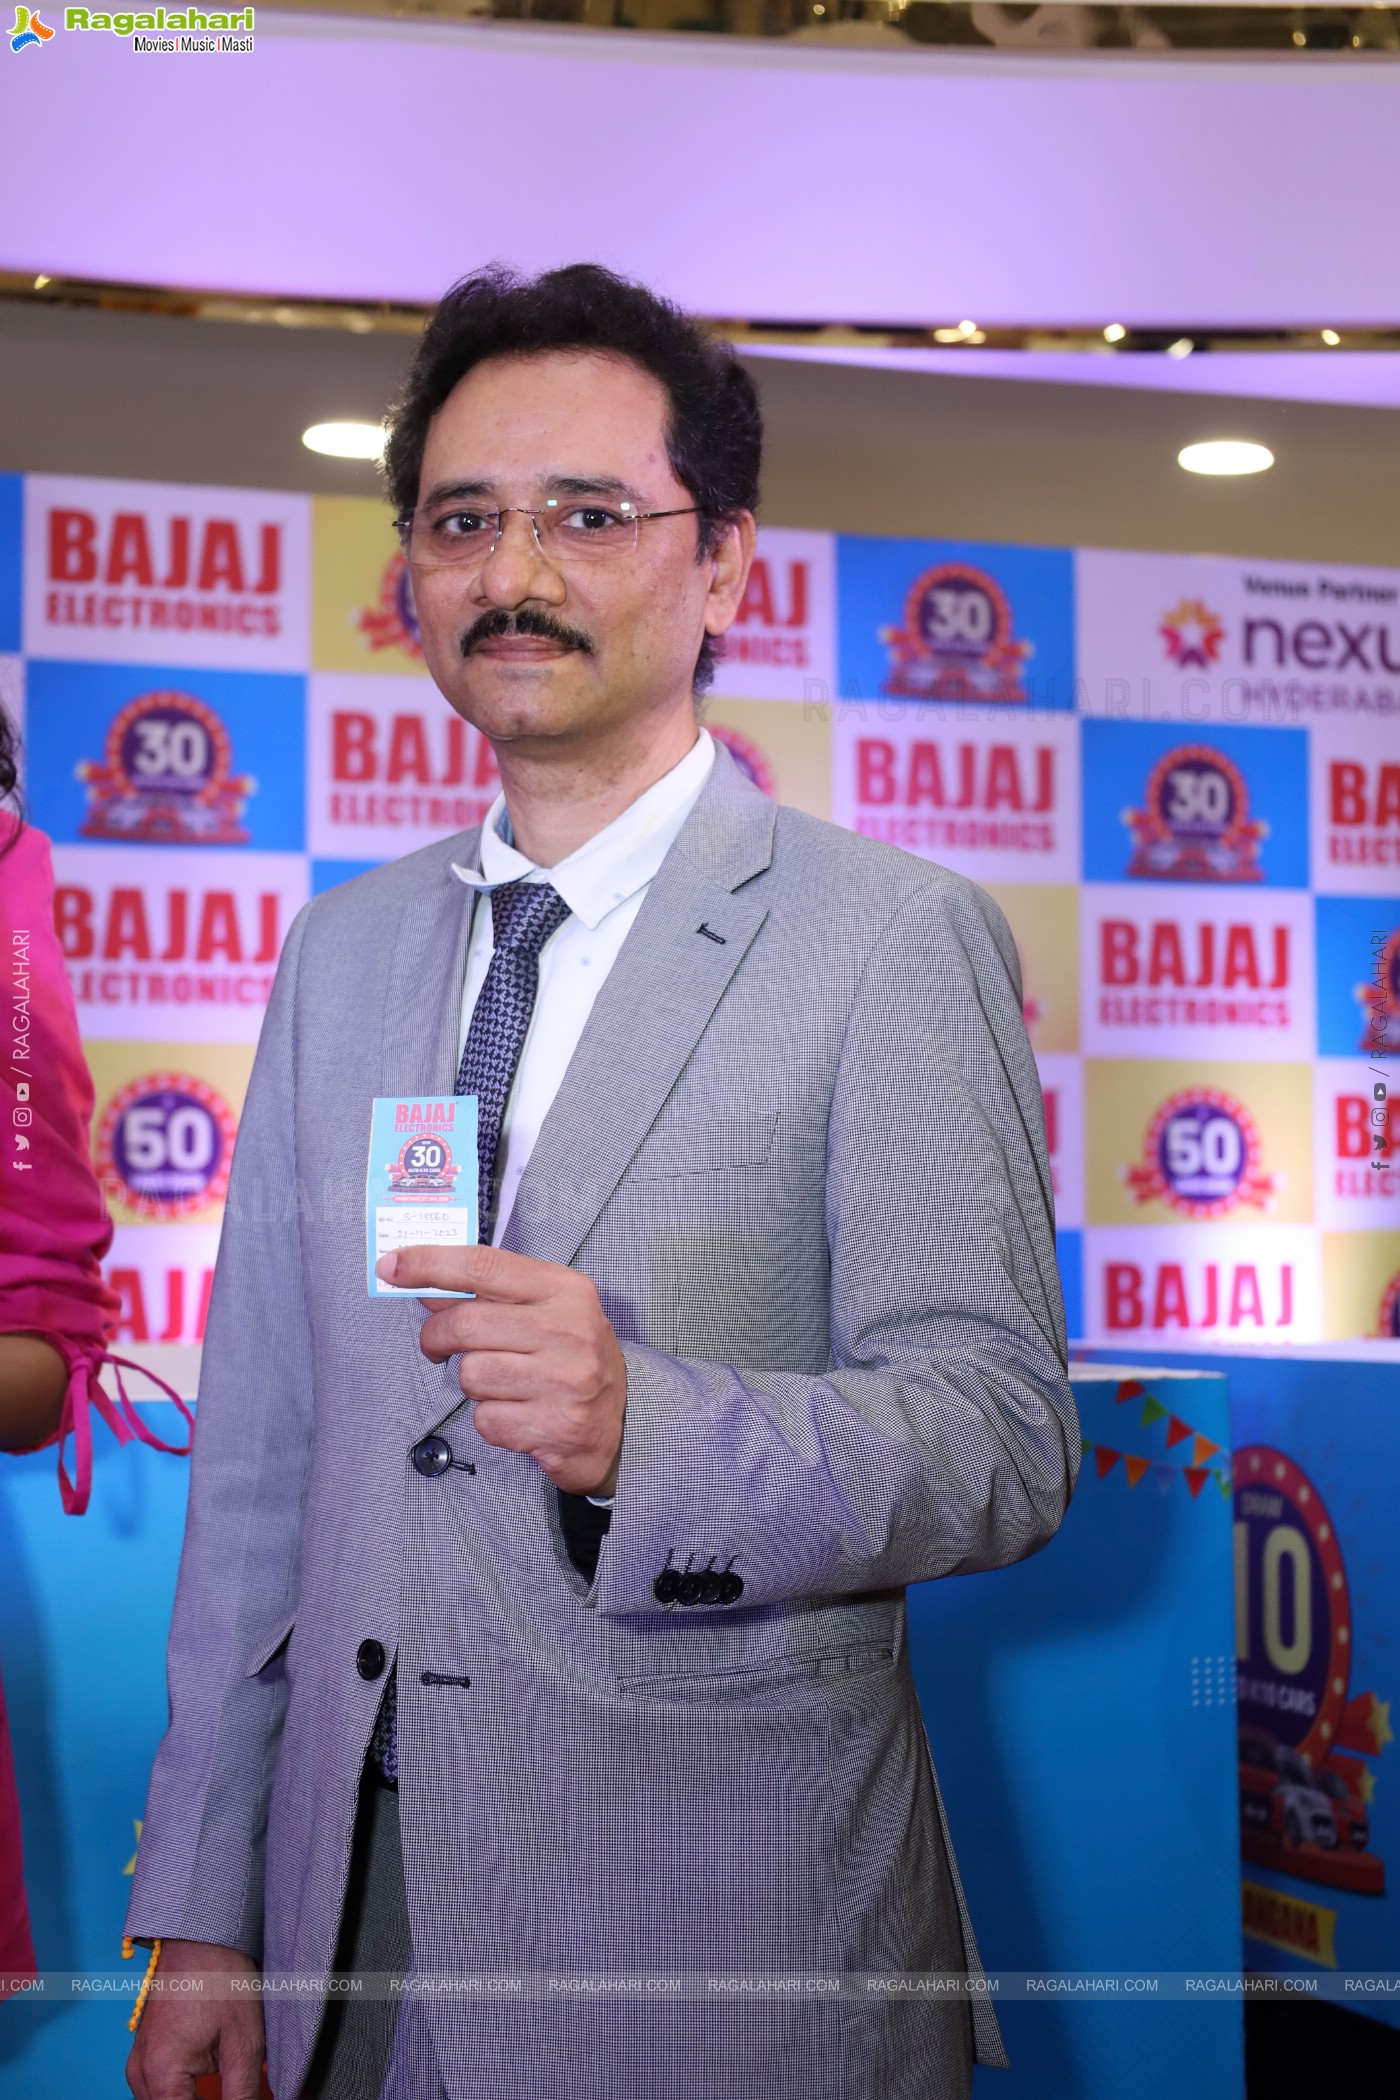 India's Biggest Festive Offer Lucky Draw by Bajaj Electronics